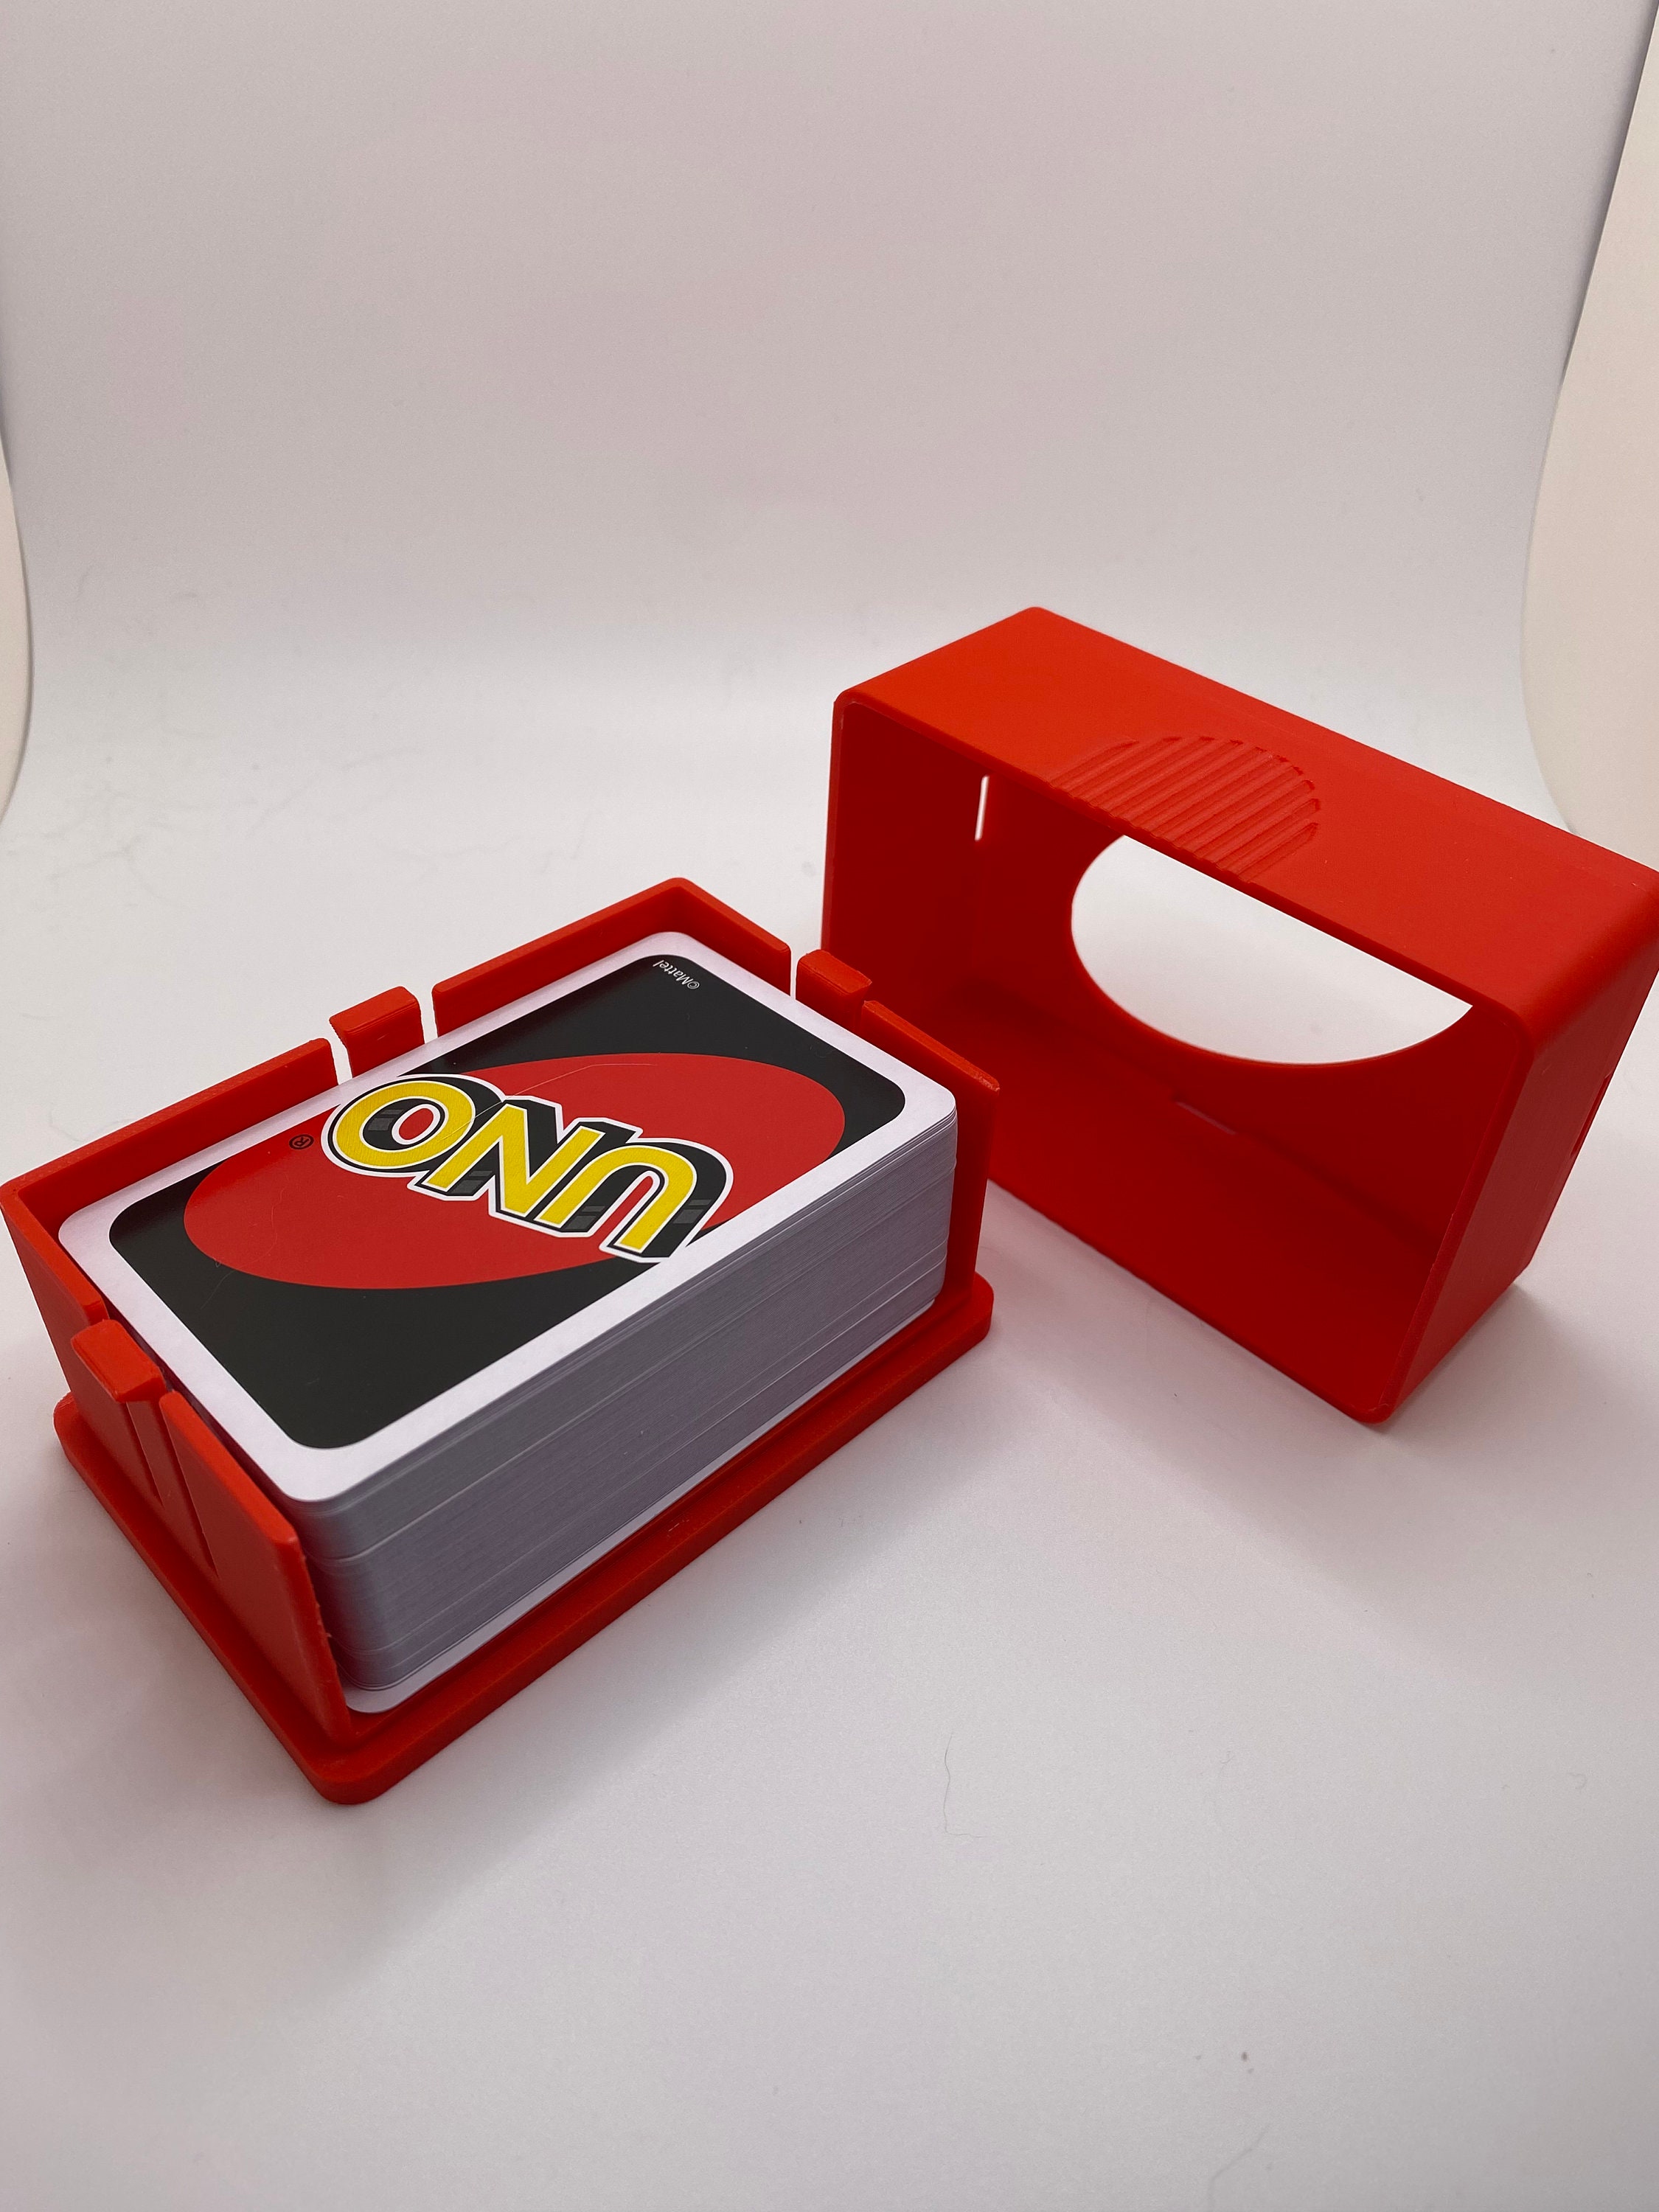 uno-card-holder • What is Best in Life